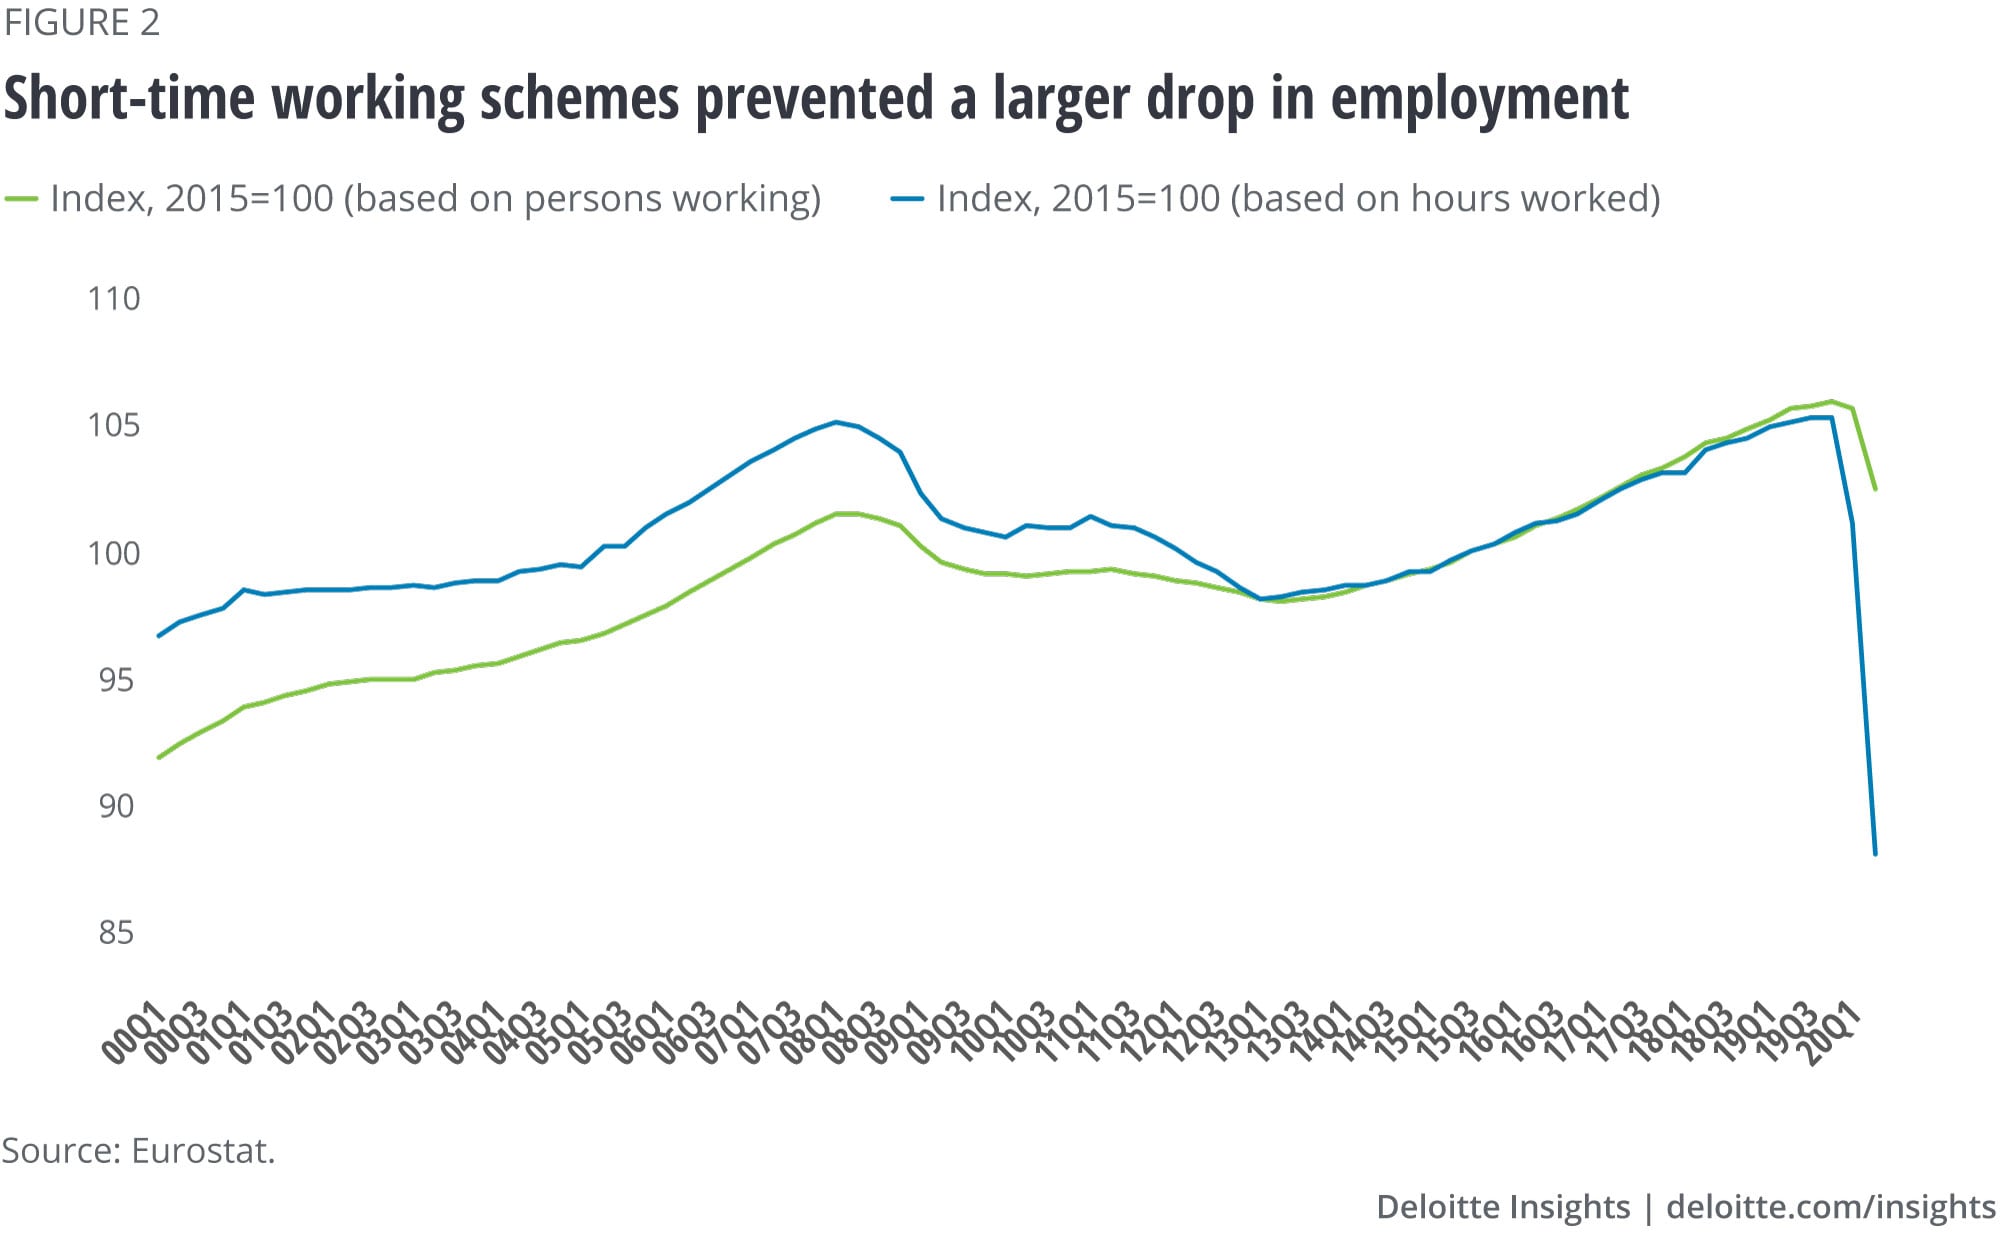 Short-time working schemes prevented a larger drop in employment